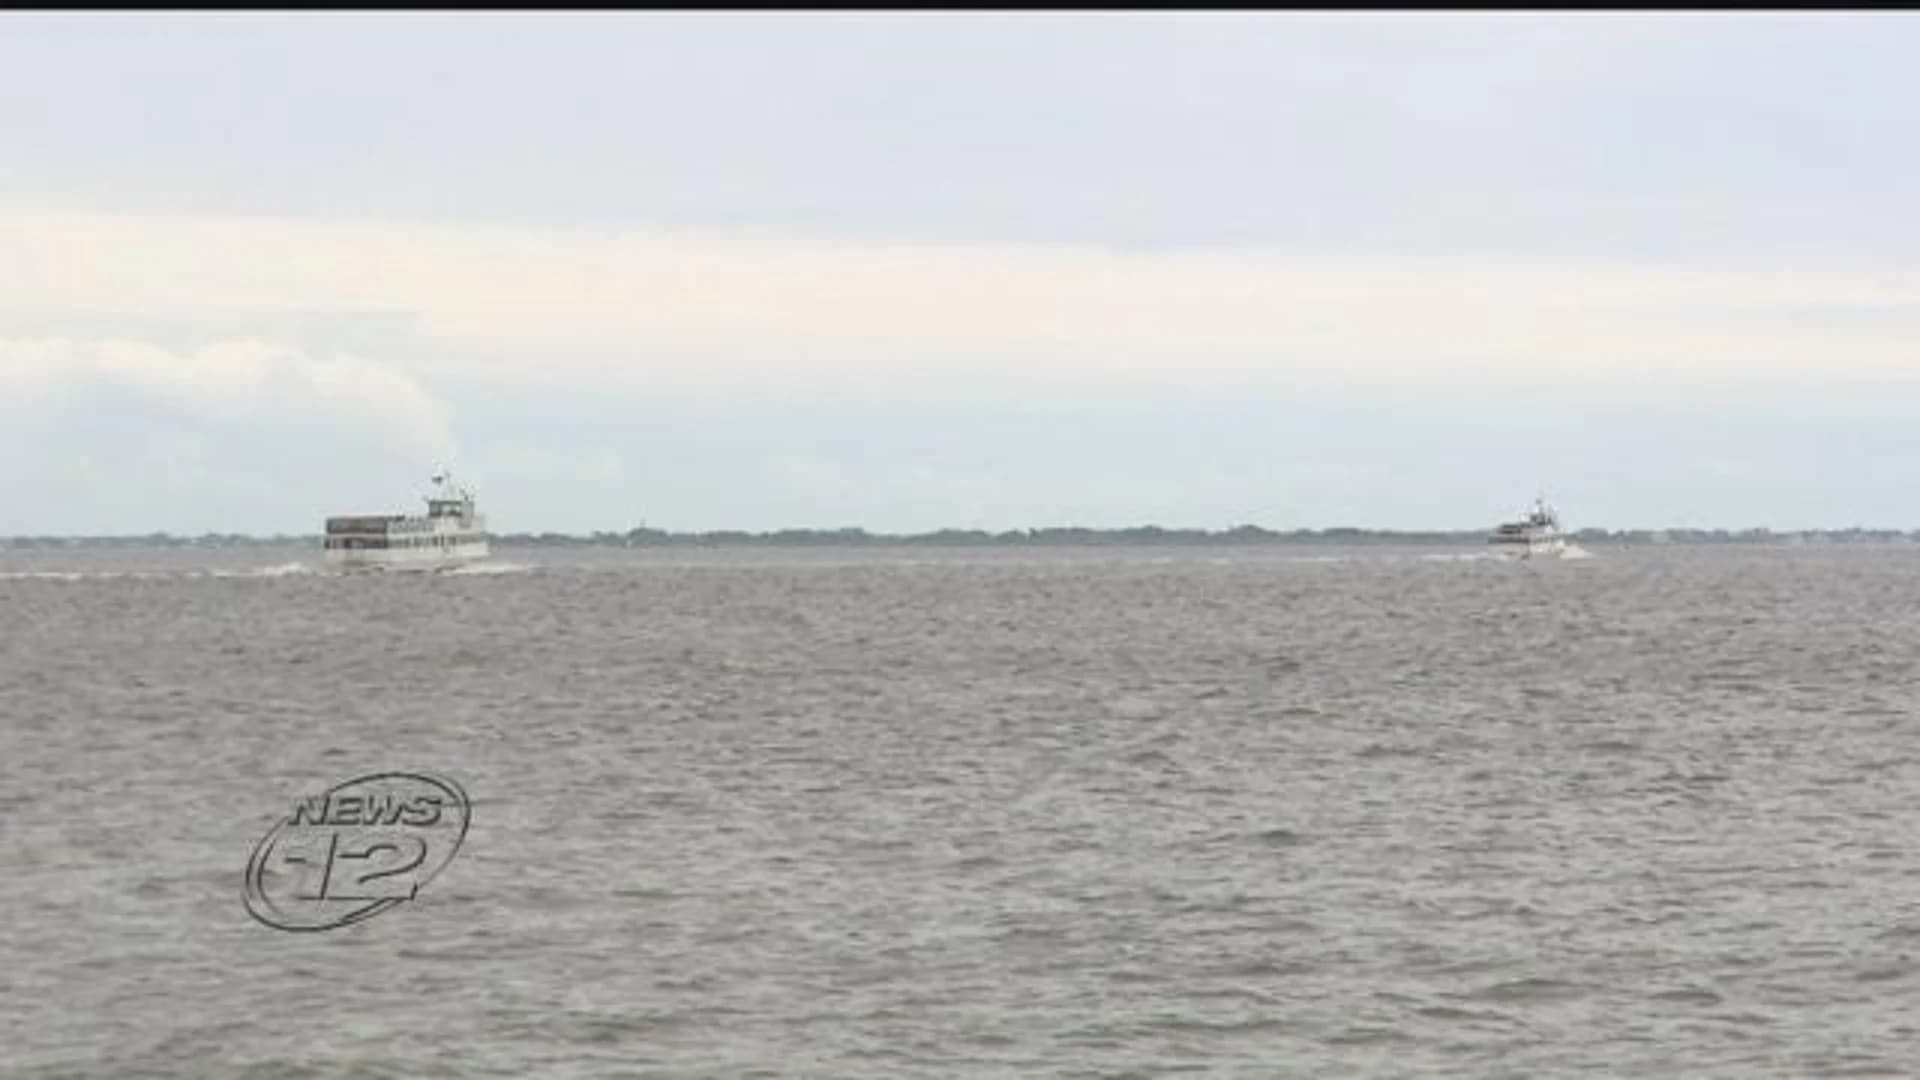 Ferry captain and crew rescue 2 boaters stranded in bay